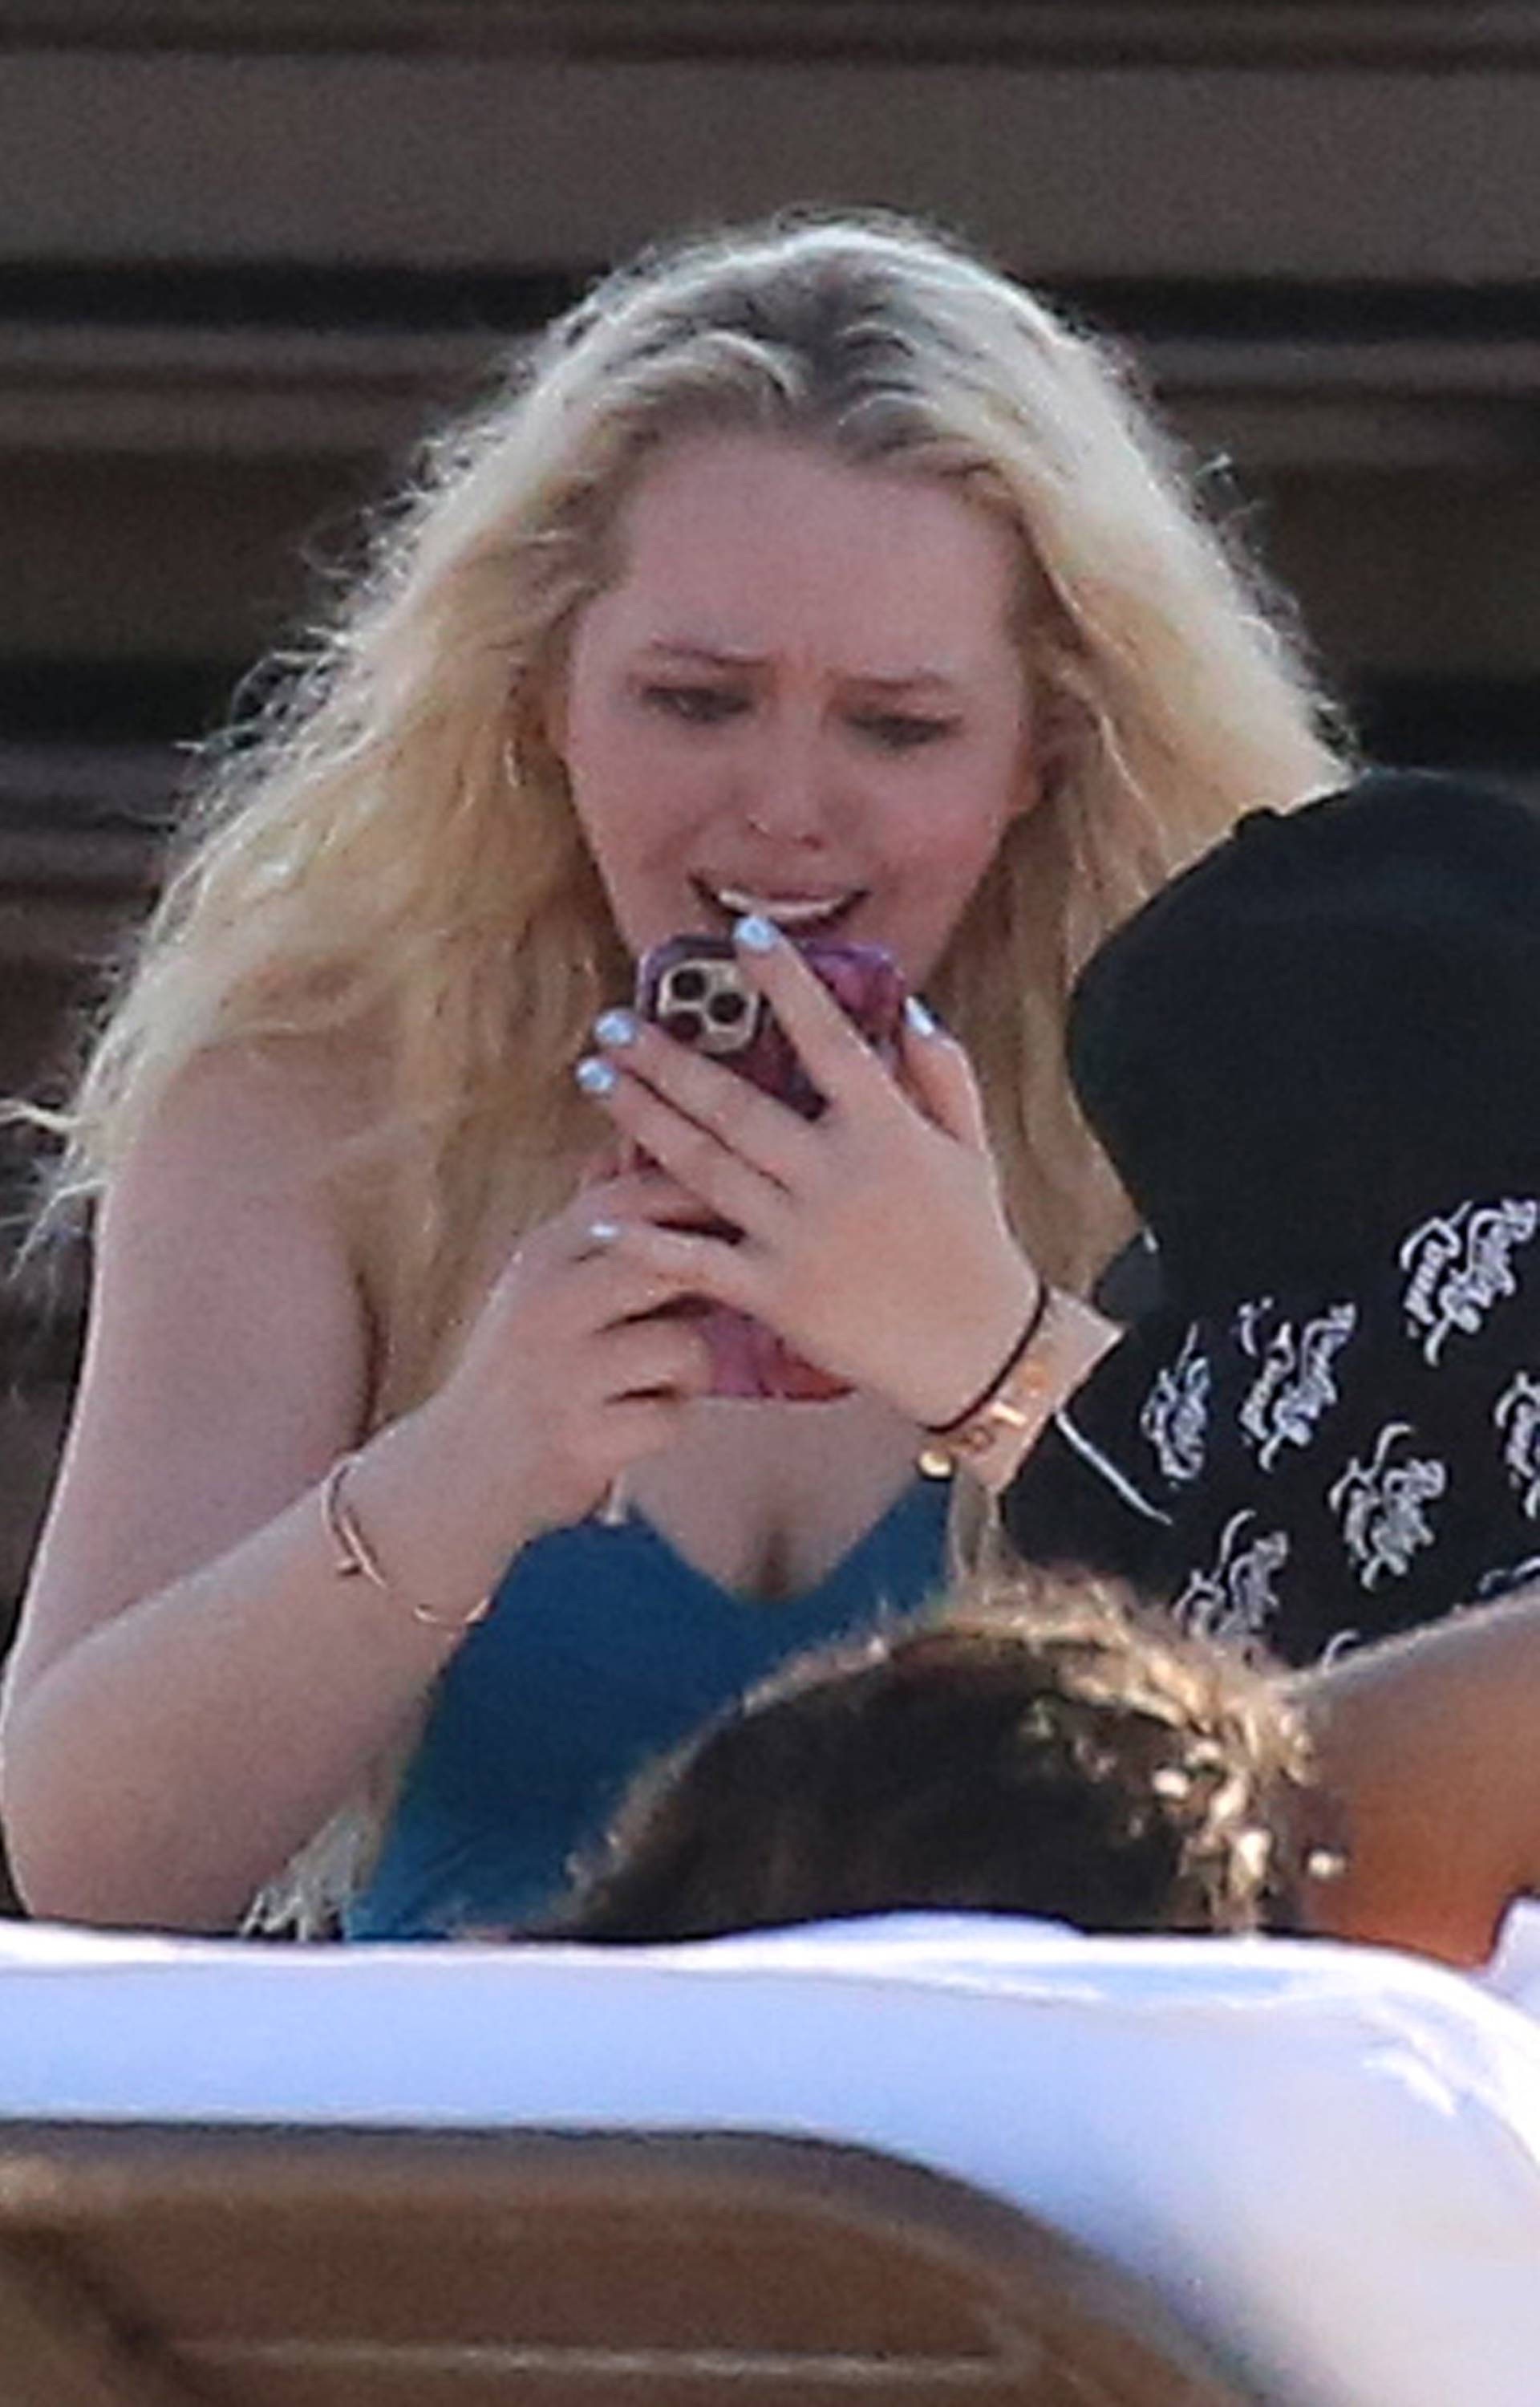 *NO WEB UNTIL 1500 EDT 15TH OCT PREMIUM EXCLUSIVE* Tiffany Trump wears a blue swimsuit and appears to go through a range of emotions as she relaxes on the beach with friends on her birthday in Miami